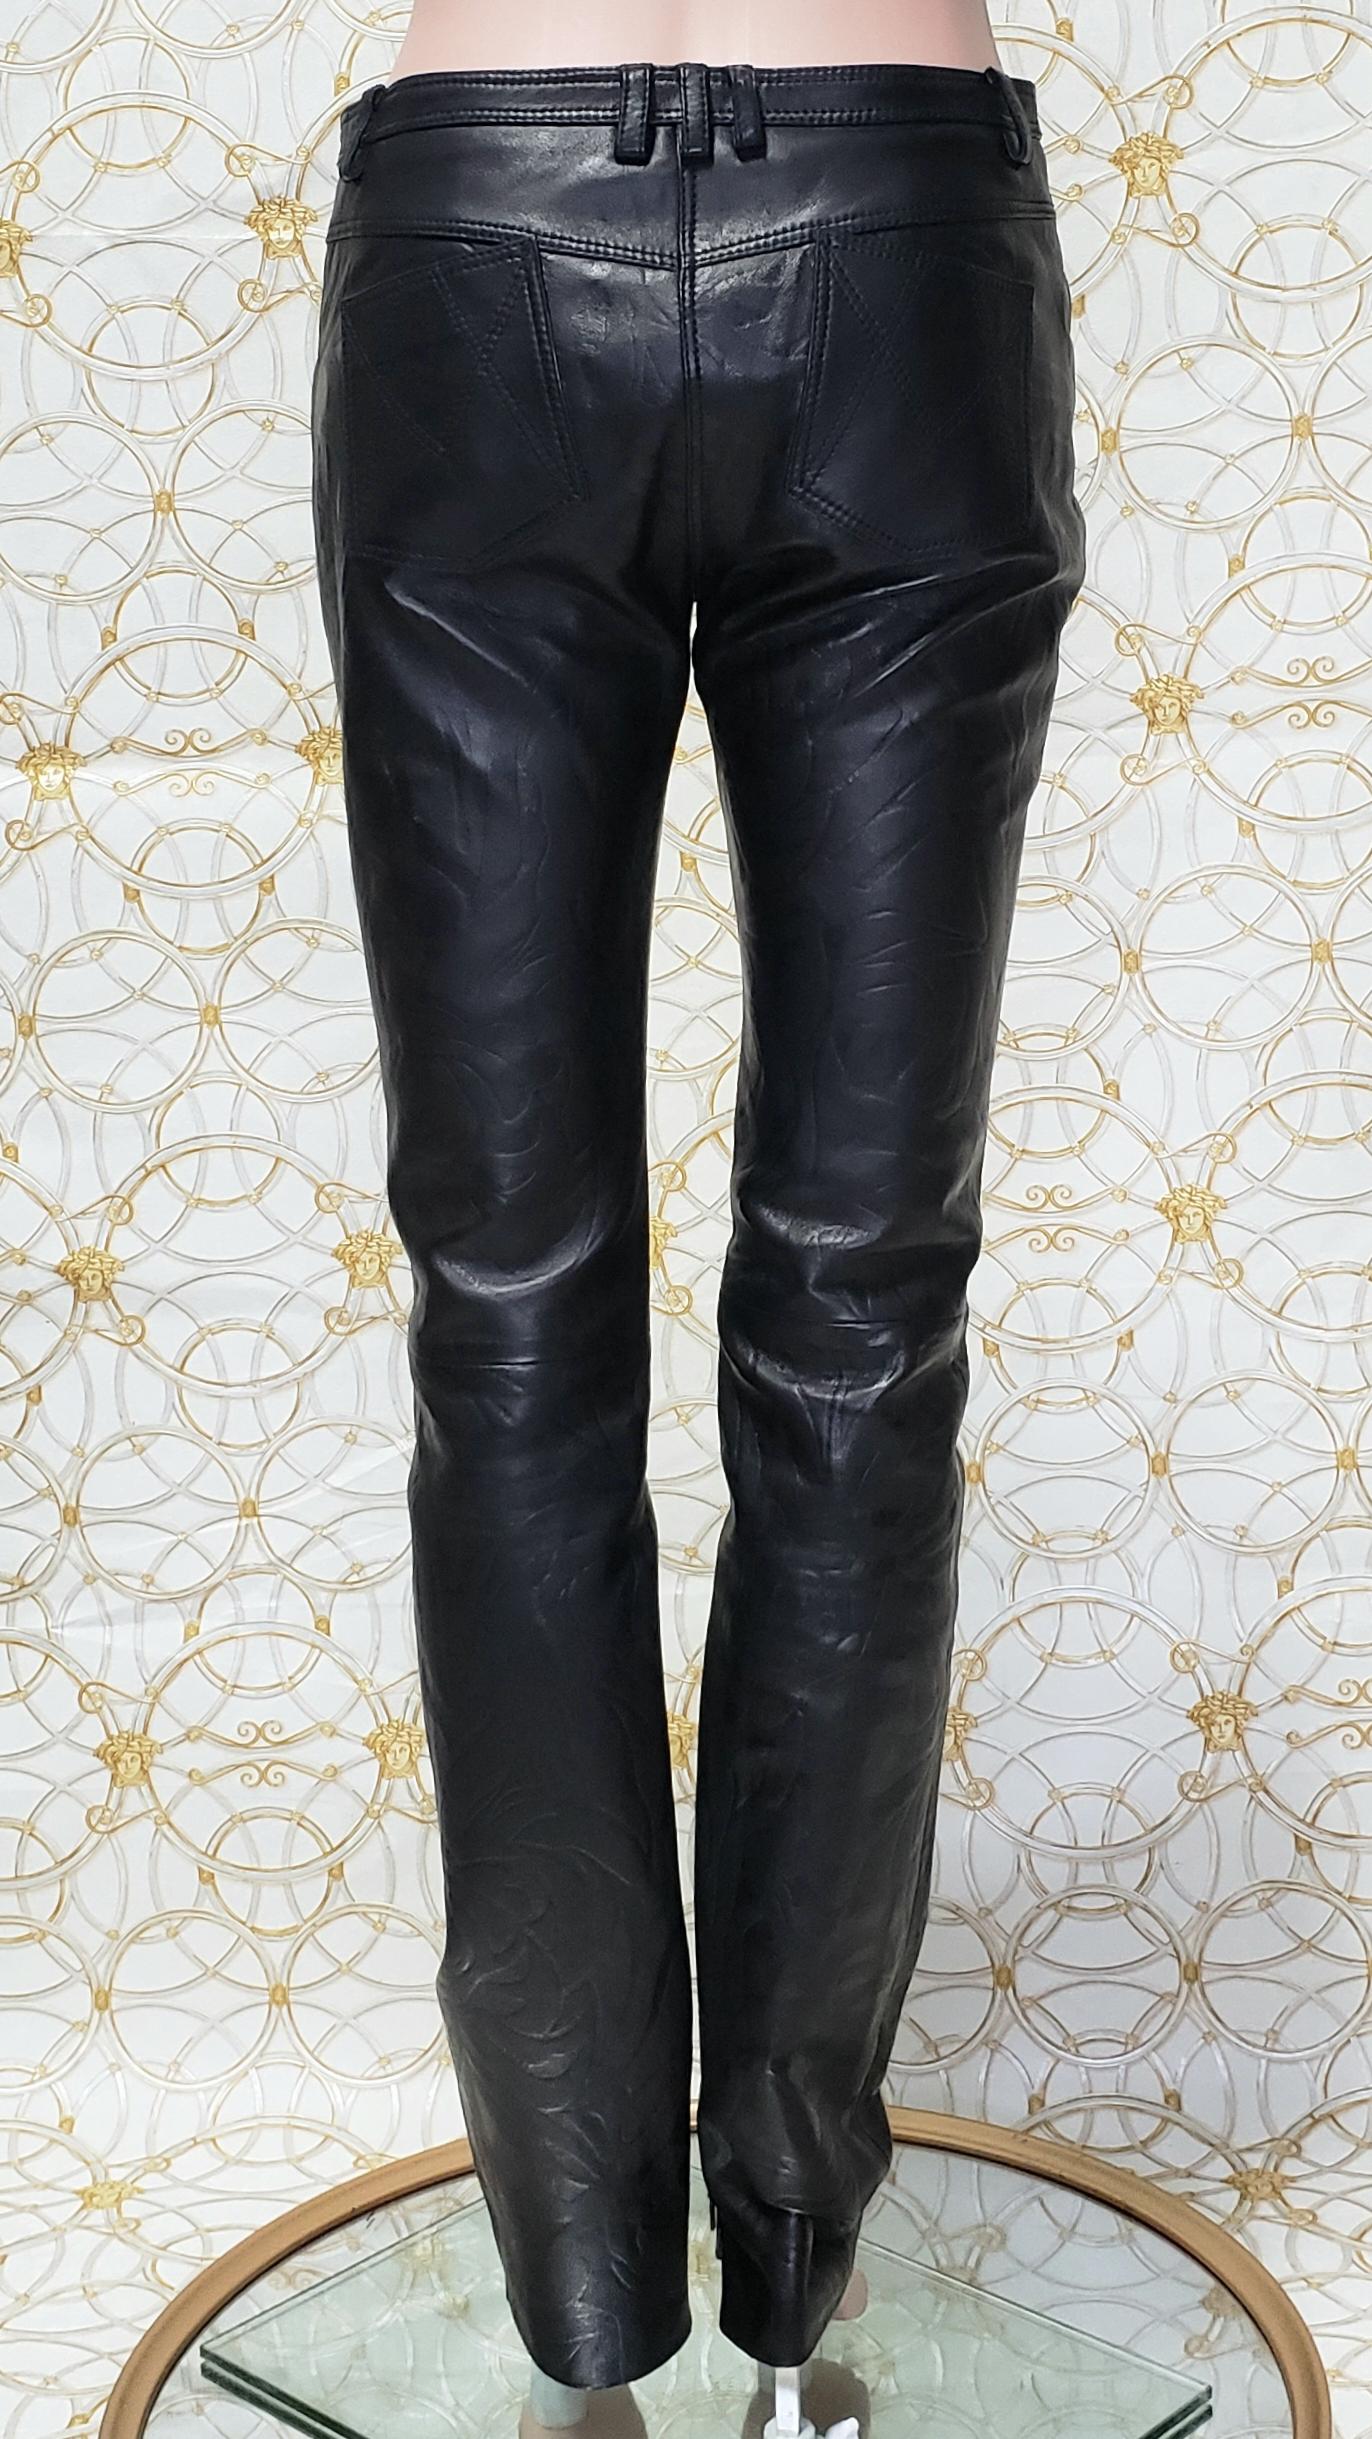 S/S 2014 Look # 35 VERSACE BLACK LEATHER FLORAL PRINT PANTS size 38 - 2 For Sale 1